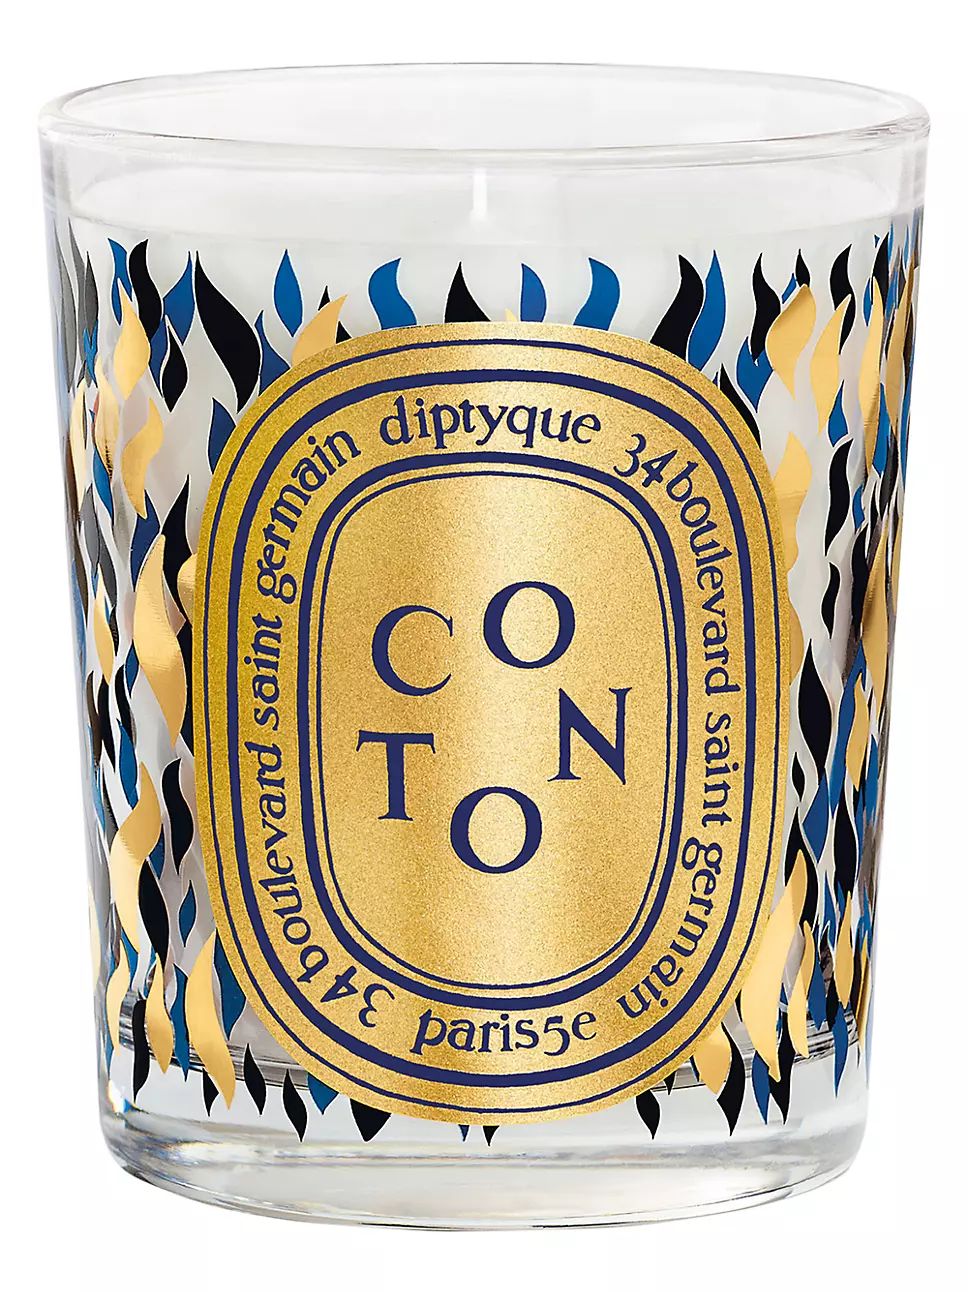 Coton (Cotton) Scented Candle | Saks Fifth Avenue